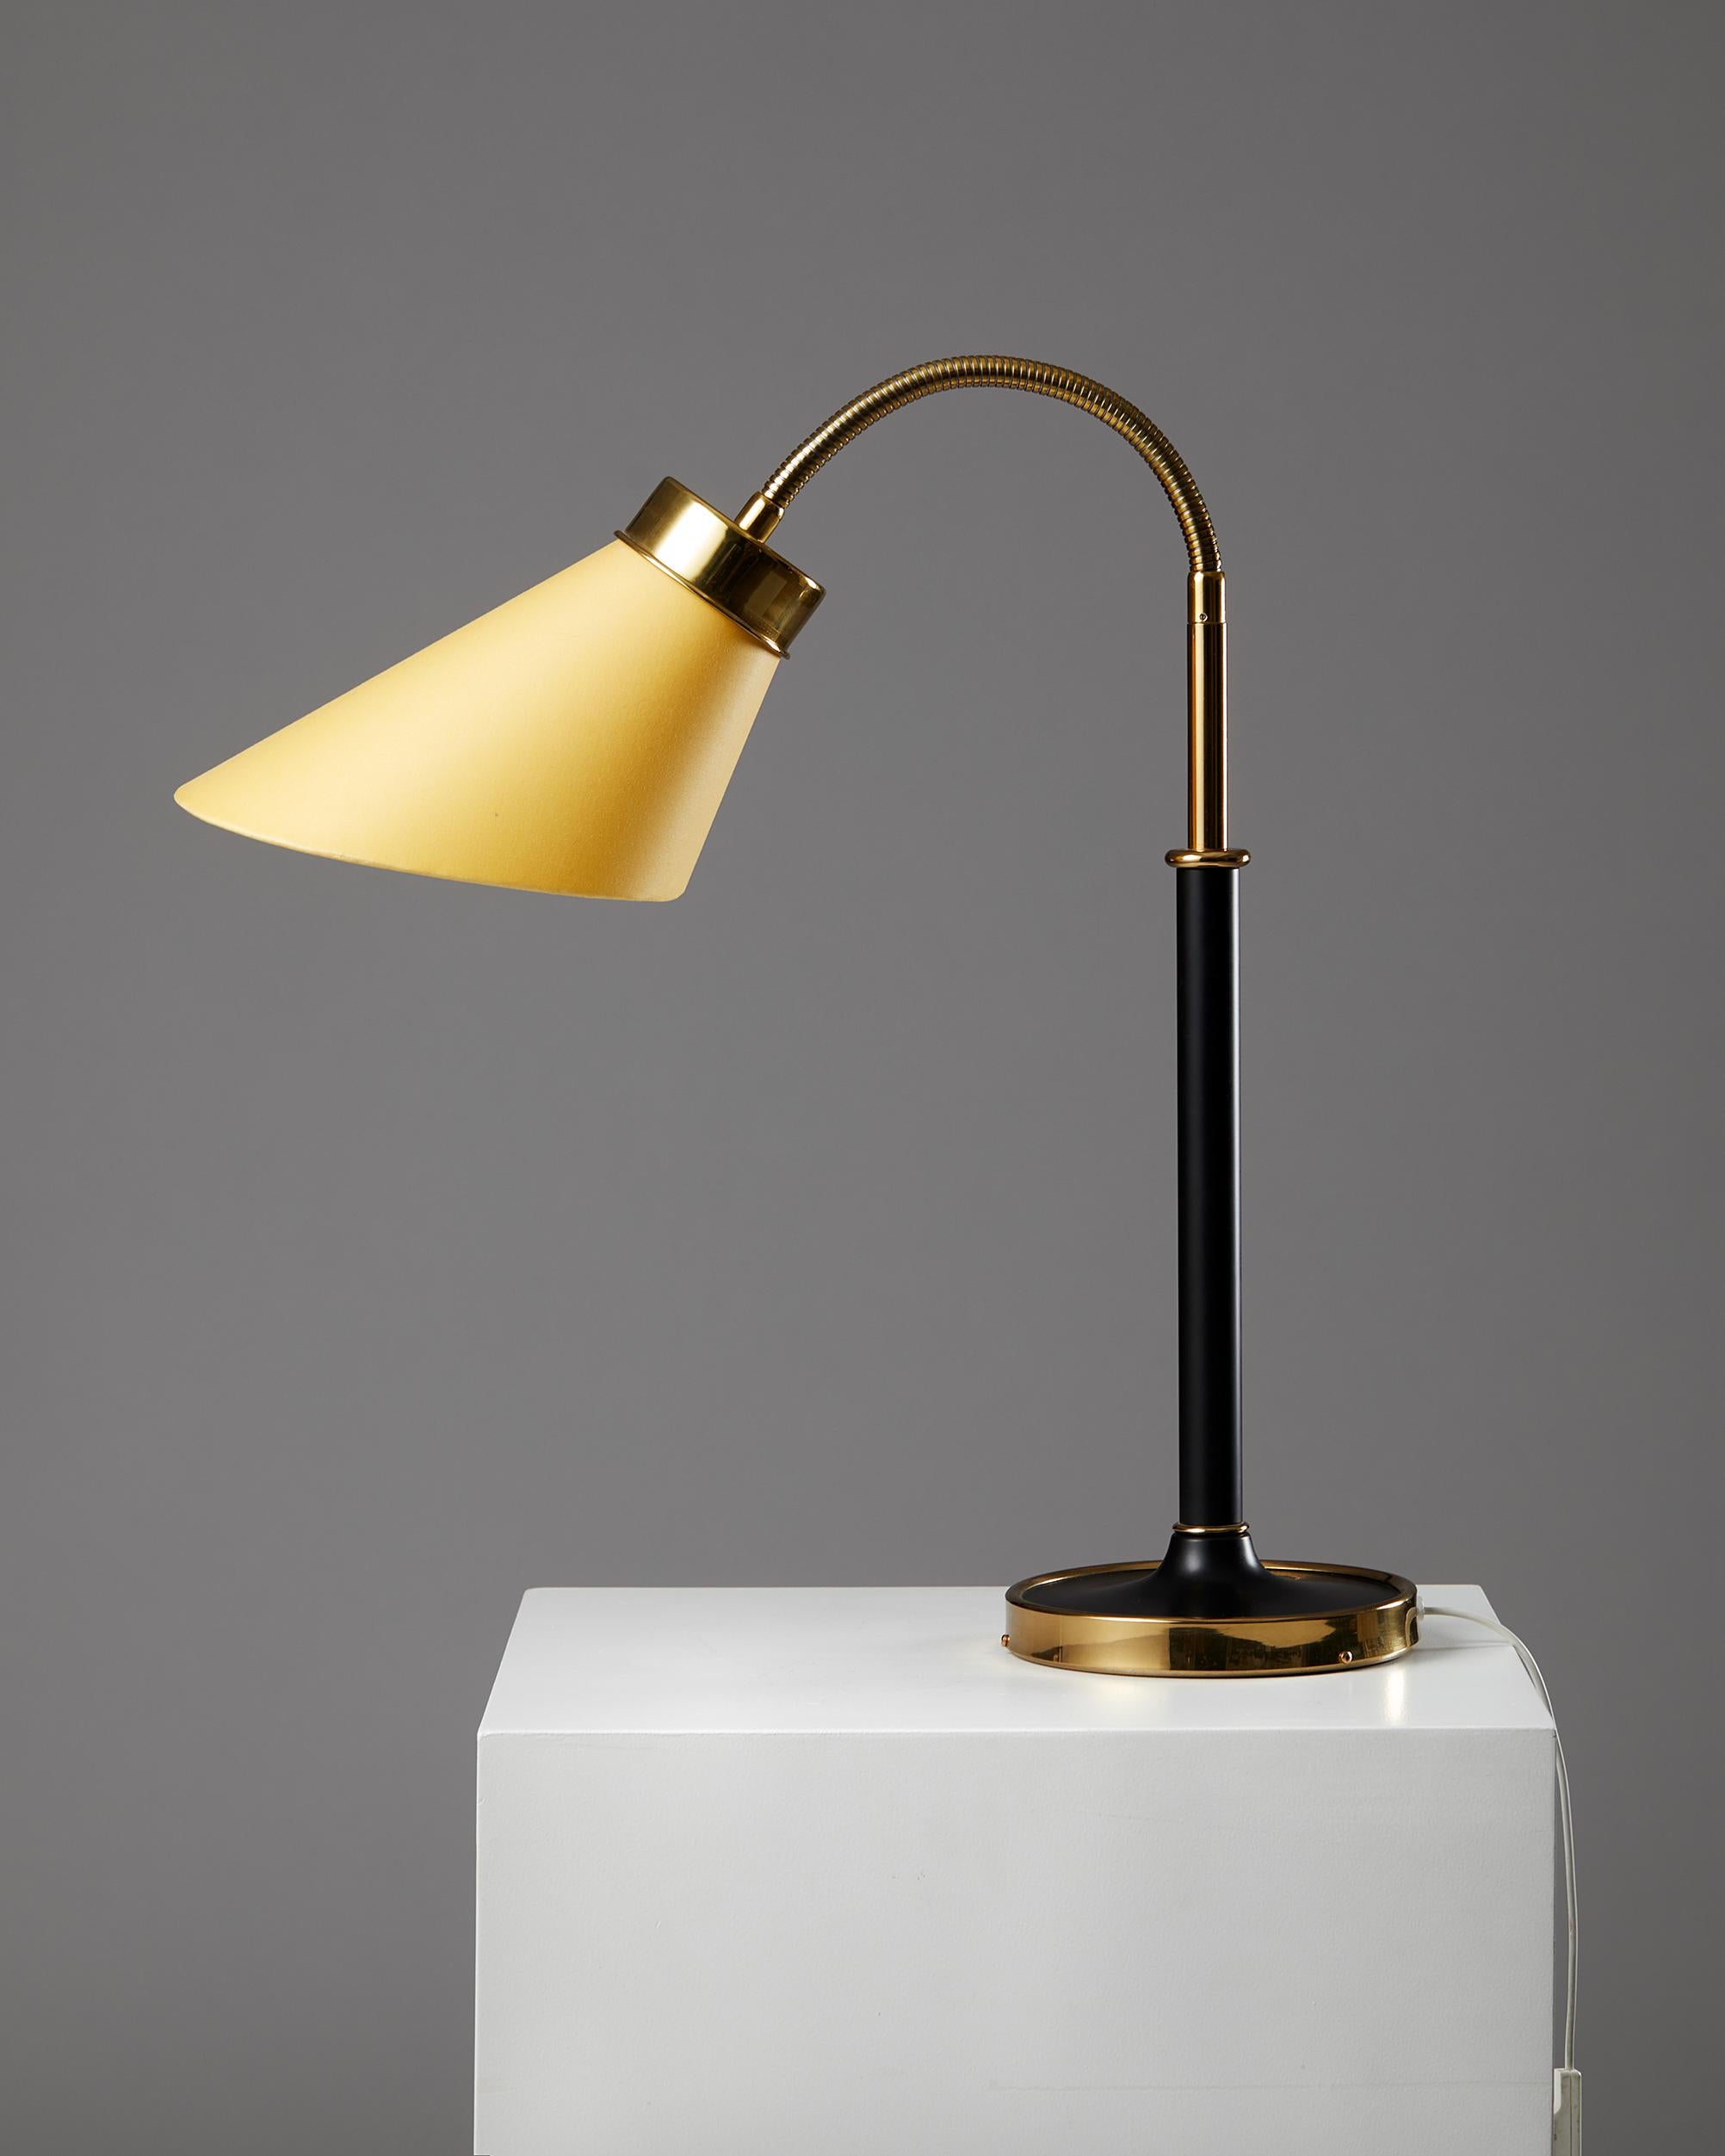 Polished and lacquered brass with fabric shade.

Measures: H: 58.5 cm/ 1' 11